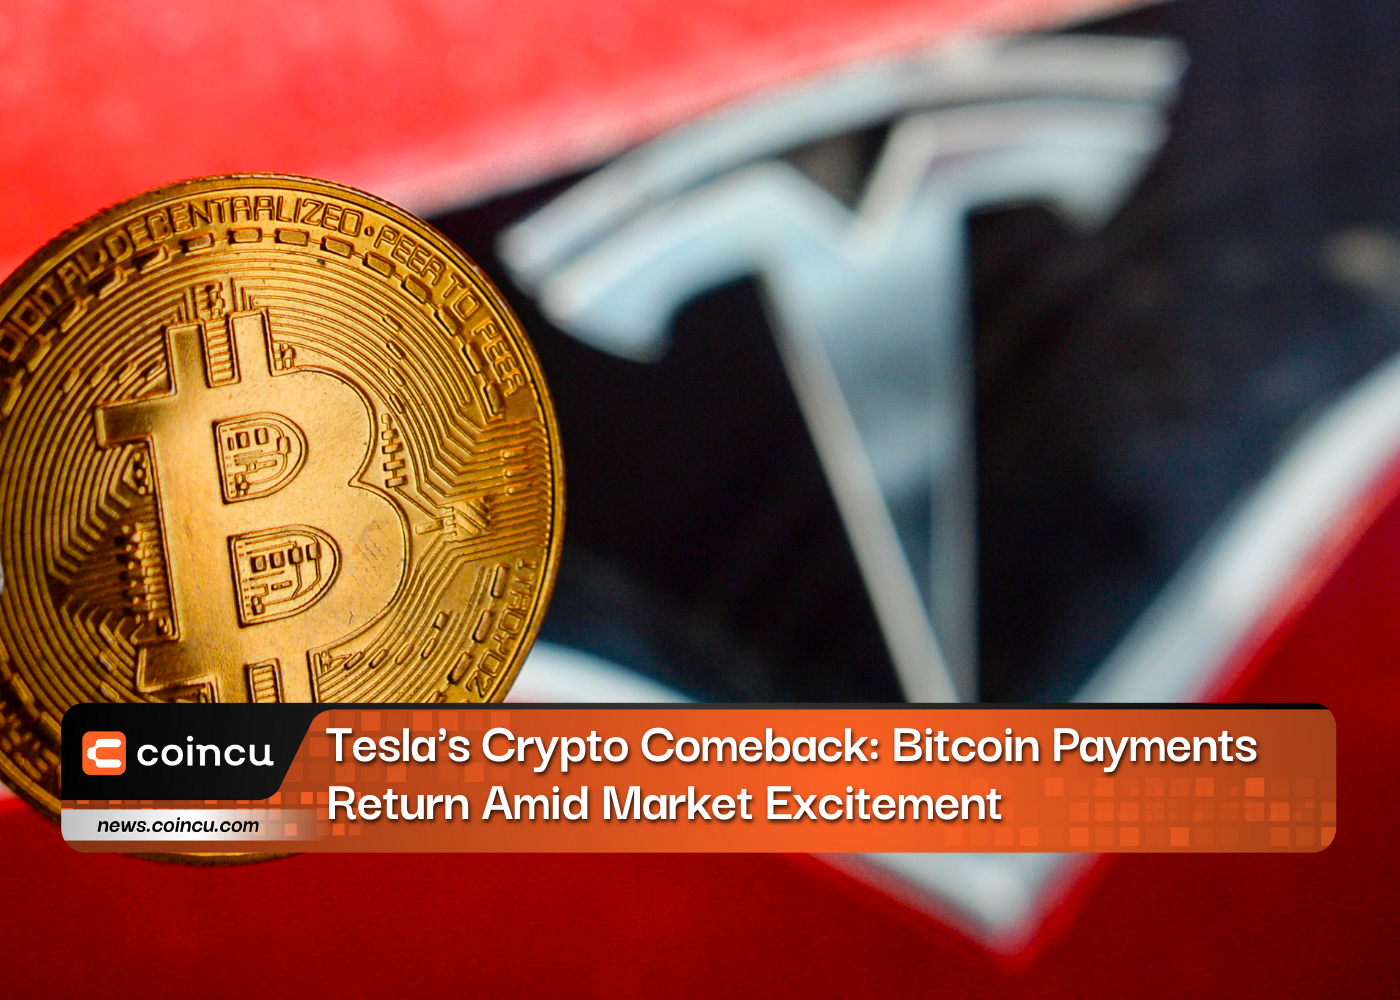 Tesla's Crypto Comeback: Bitcoin Payments Return Amid Market Excitement